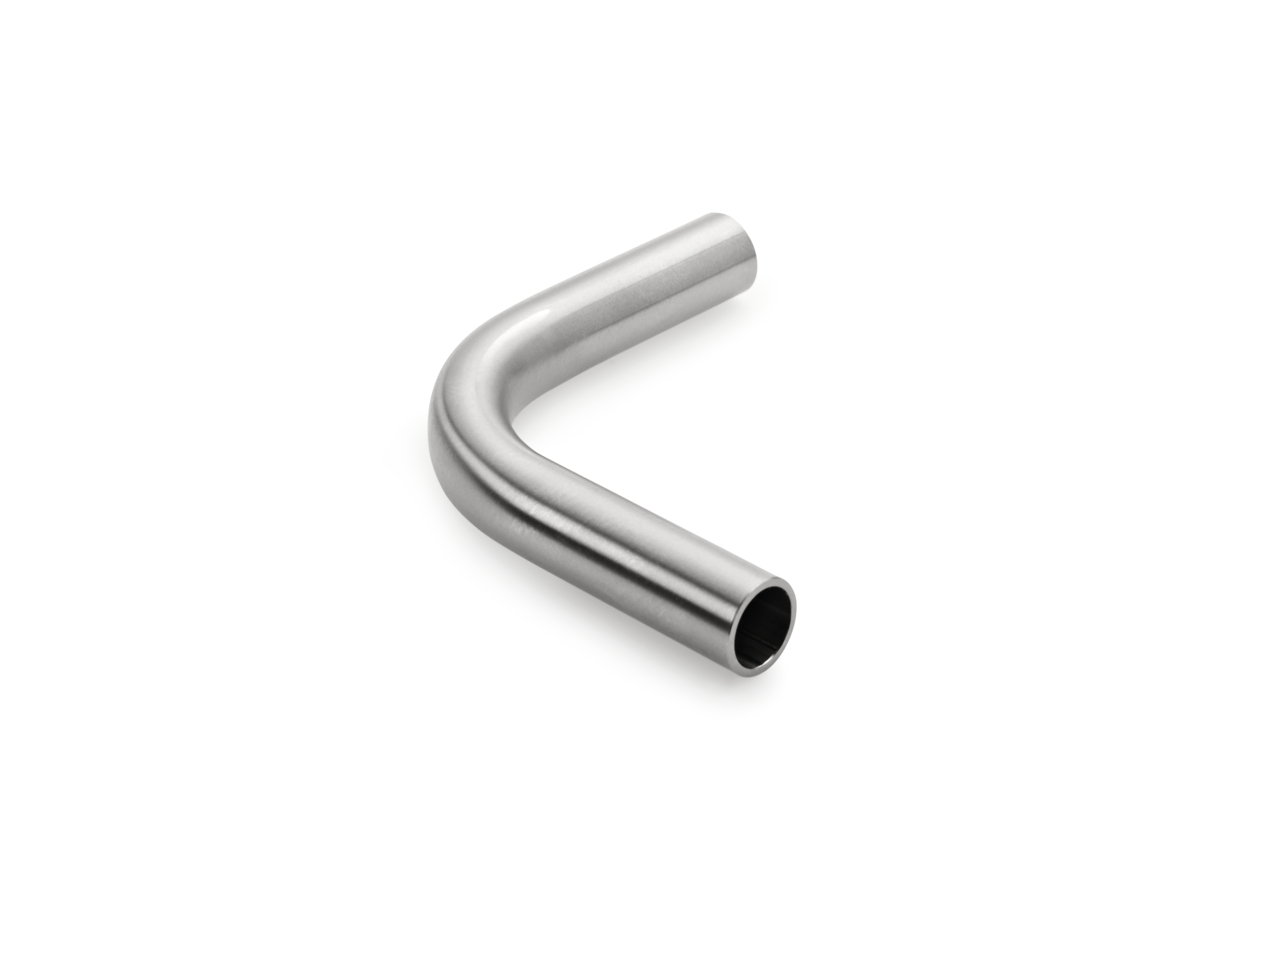  Stainless steel rail bend 90°, stainless steel